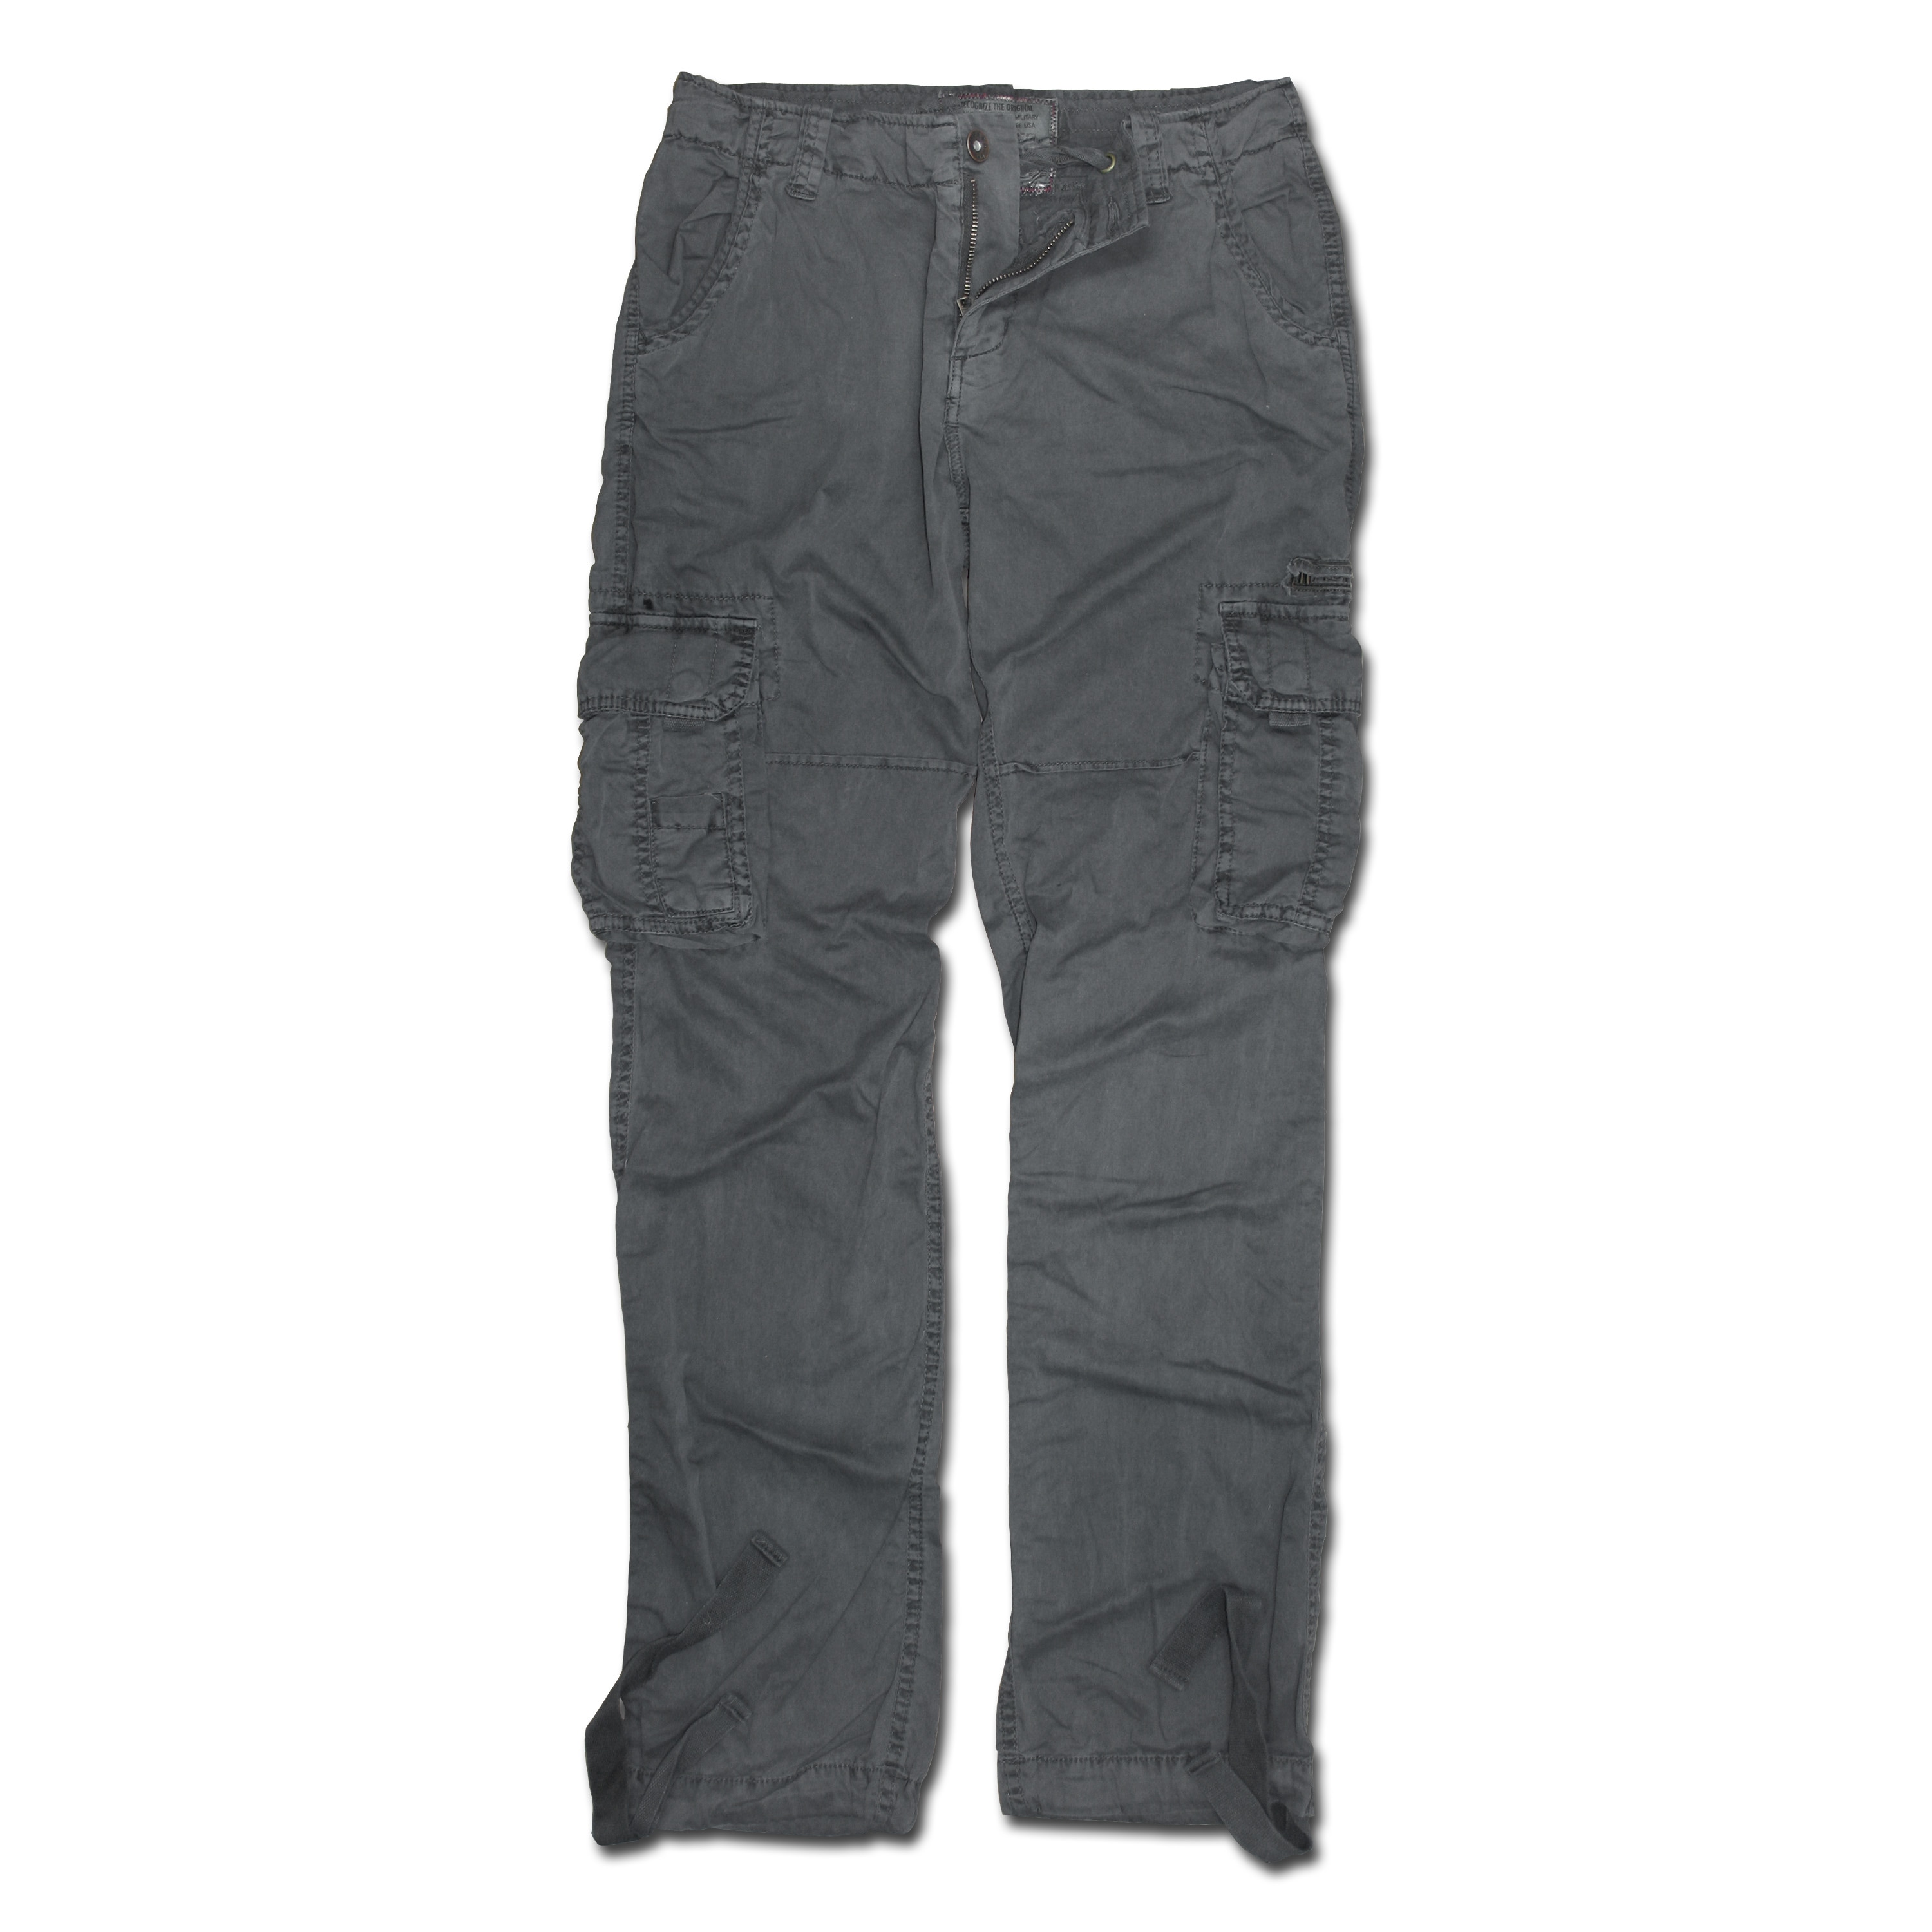 Purchase the Pants Alpha Industries Jet gray by ASMC